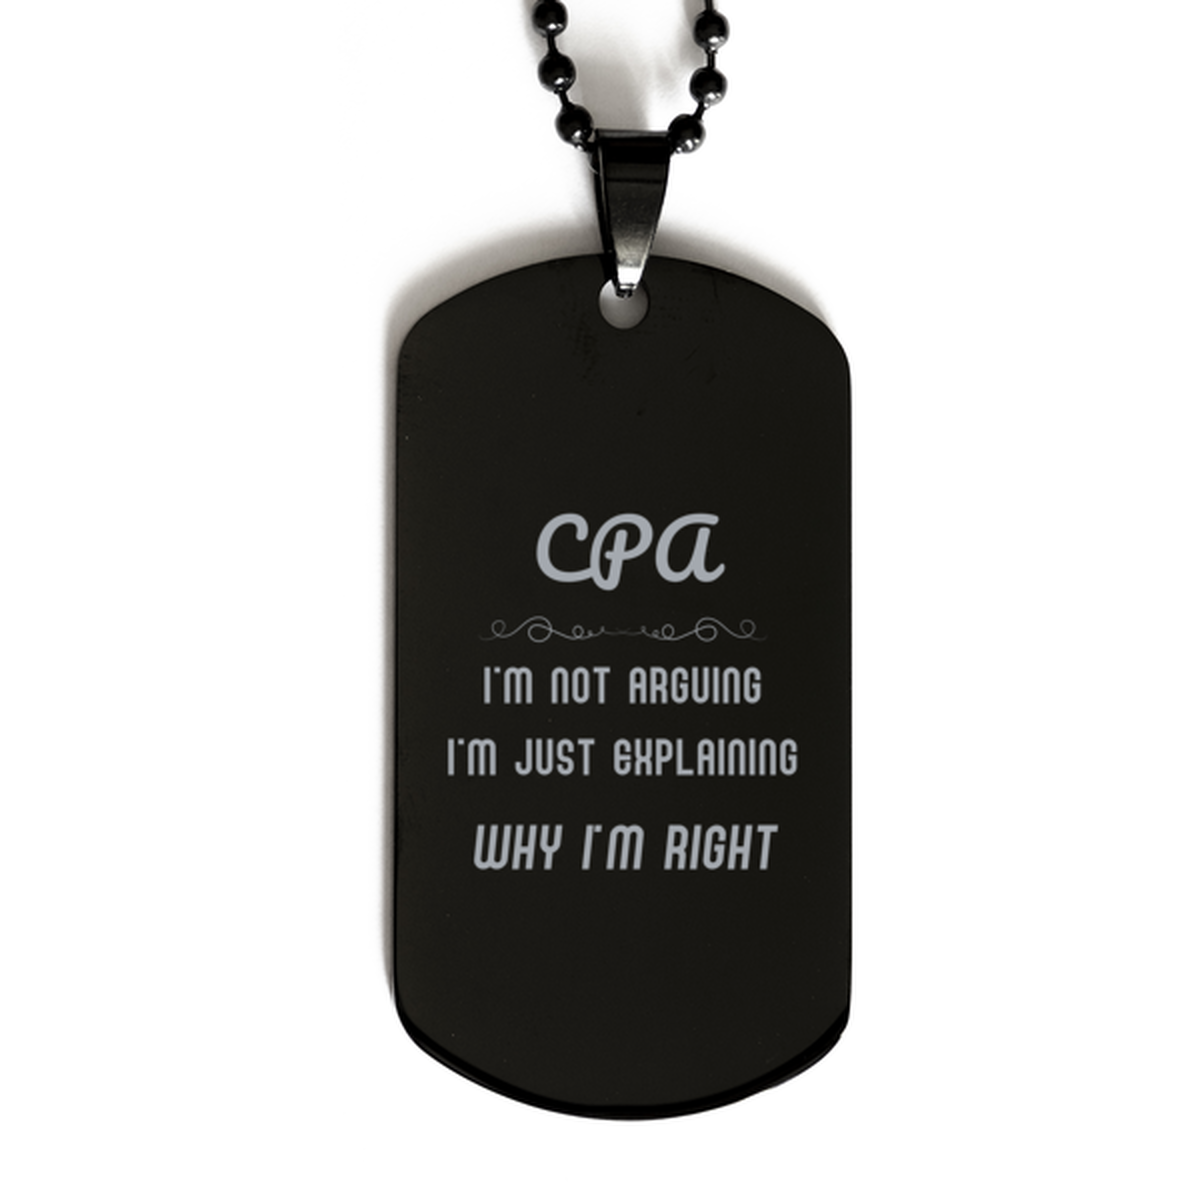 CPA I'm not Arguing. I'm Just Explaining Why I'm RIGHT Black Dog Tag, Funny Saying Quote CPA Gifts For CPA Graduation Birthday Christmas Gifts for Men Women Coworker